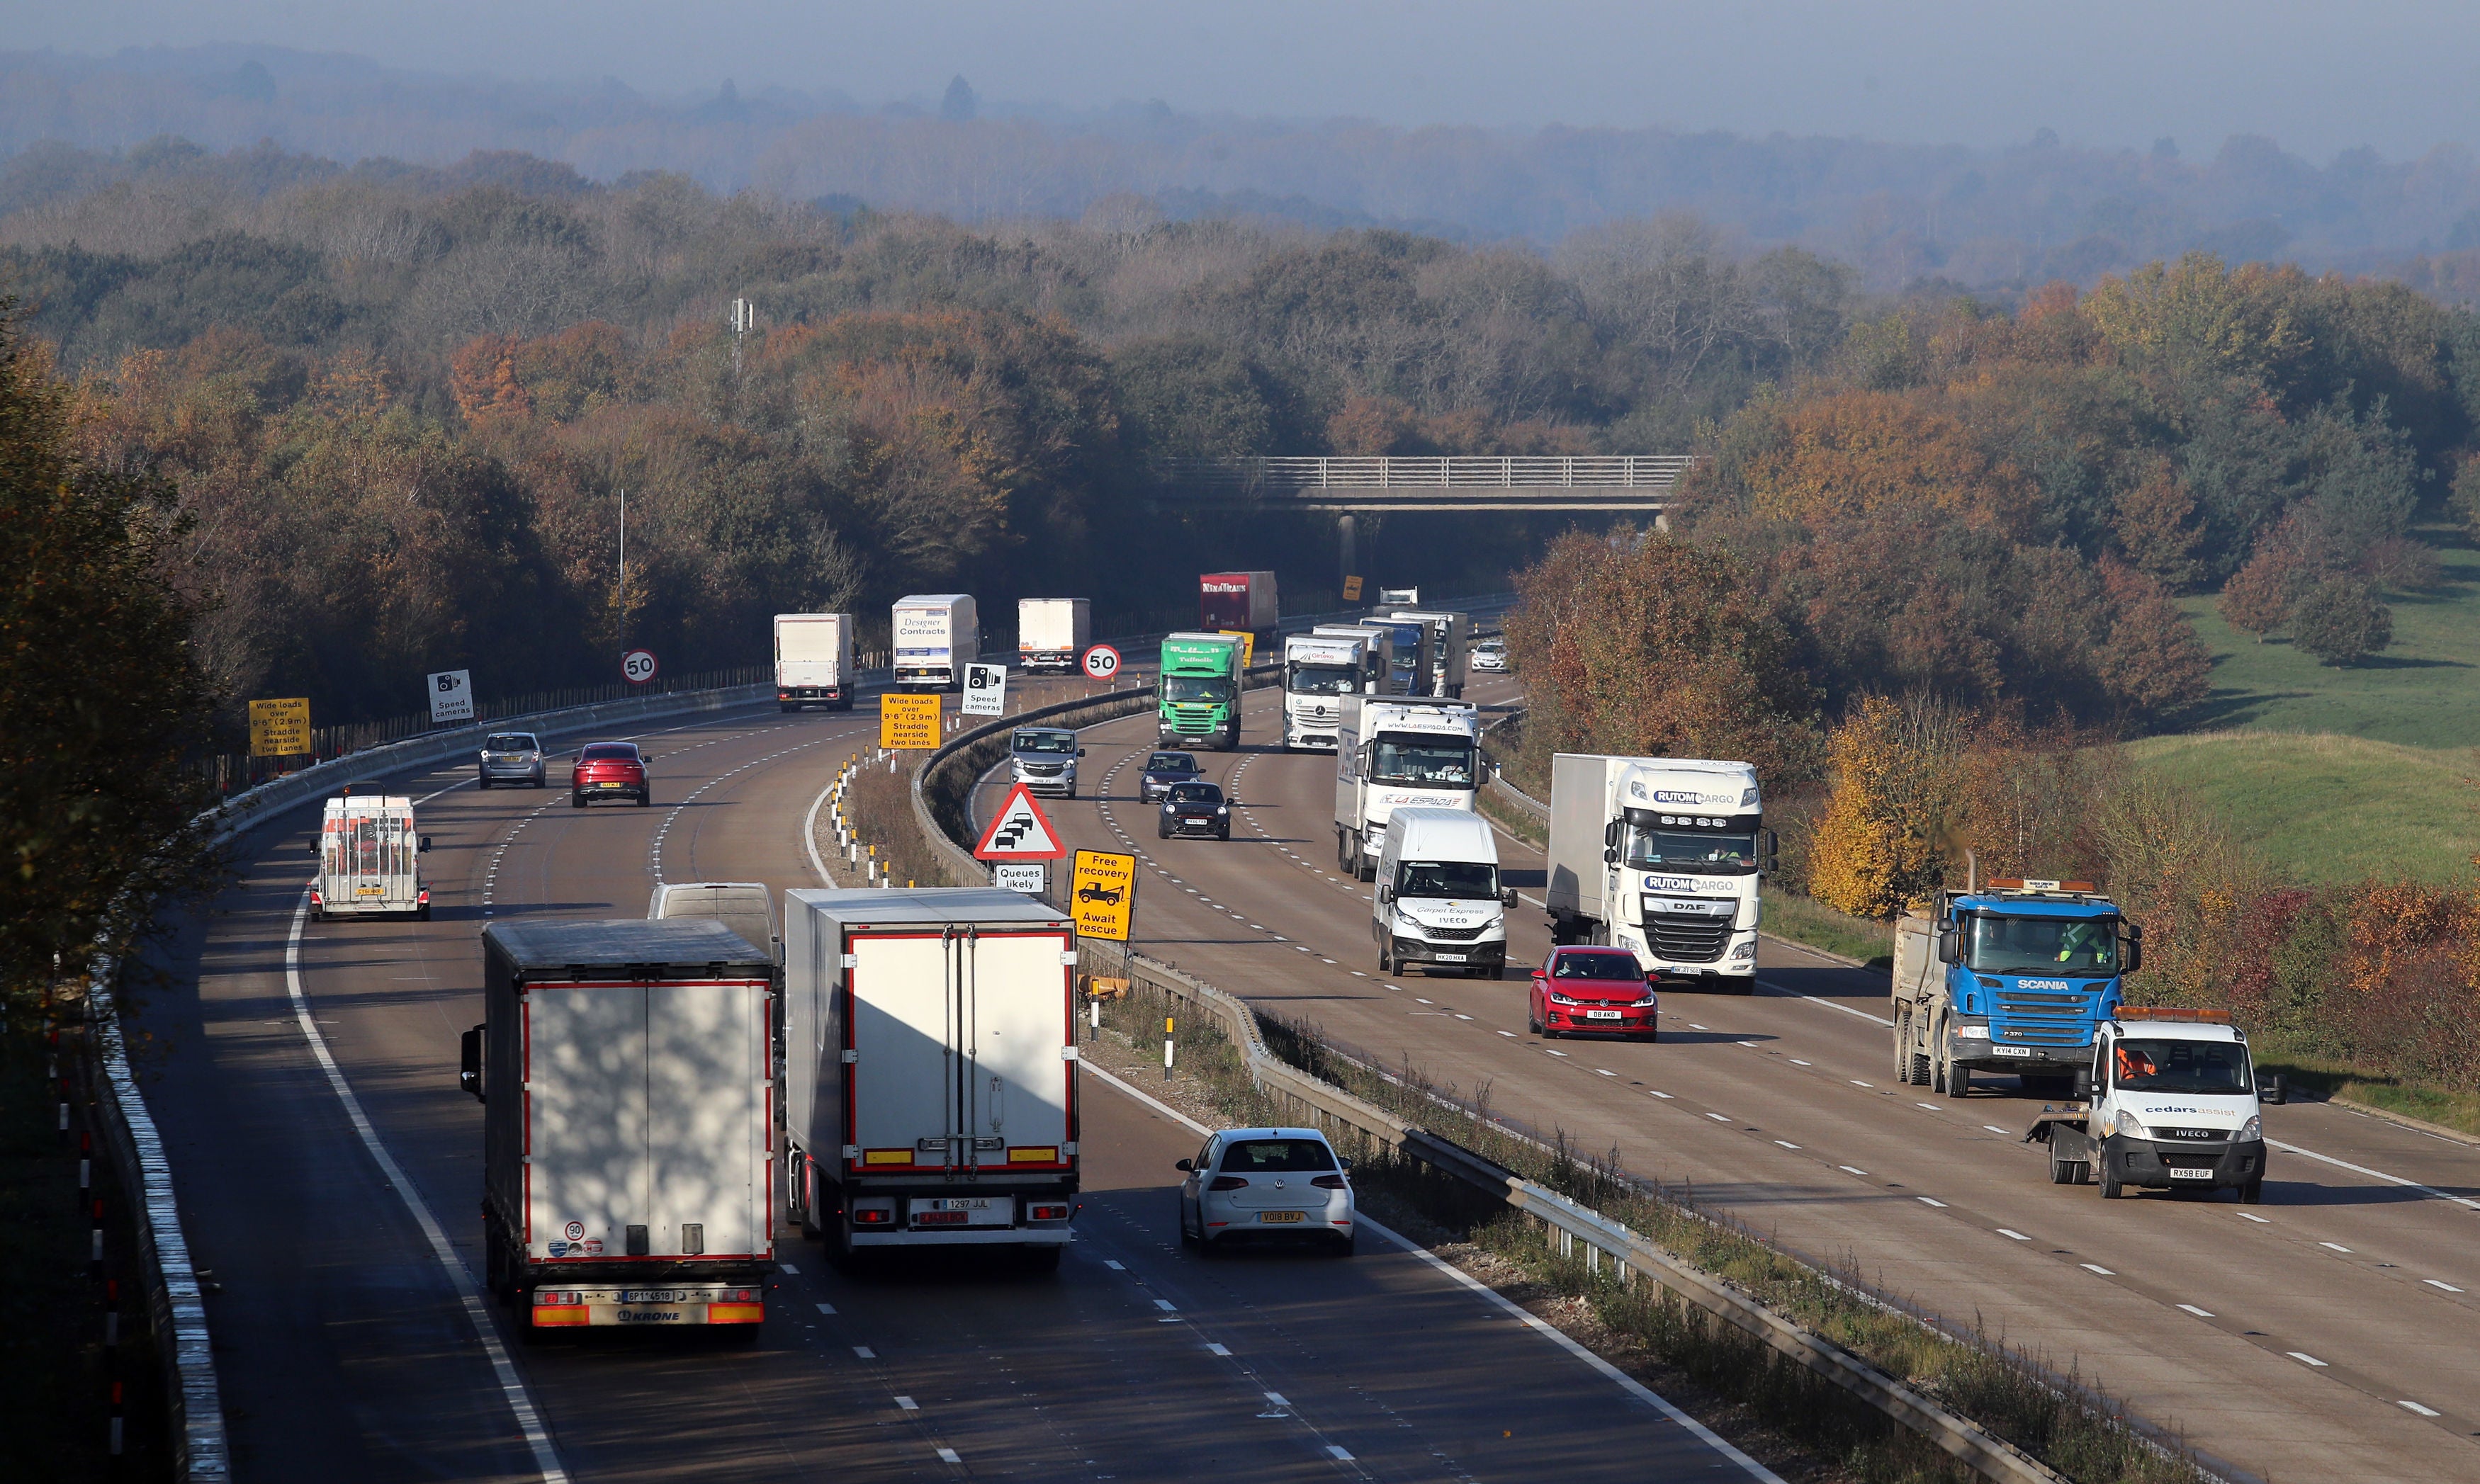 A view of the M20 motorway in Ashford, Kent